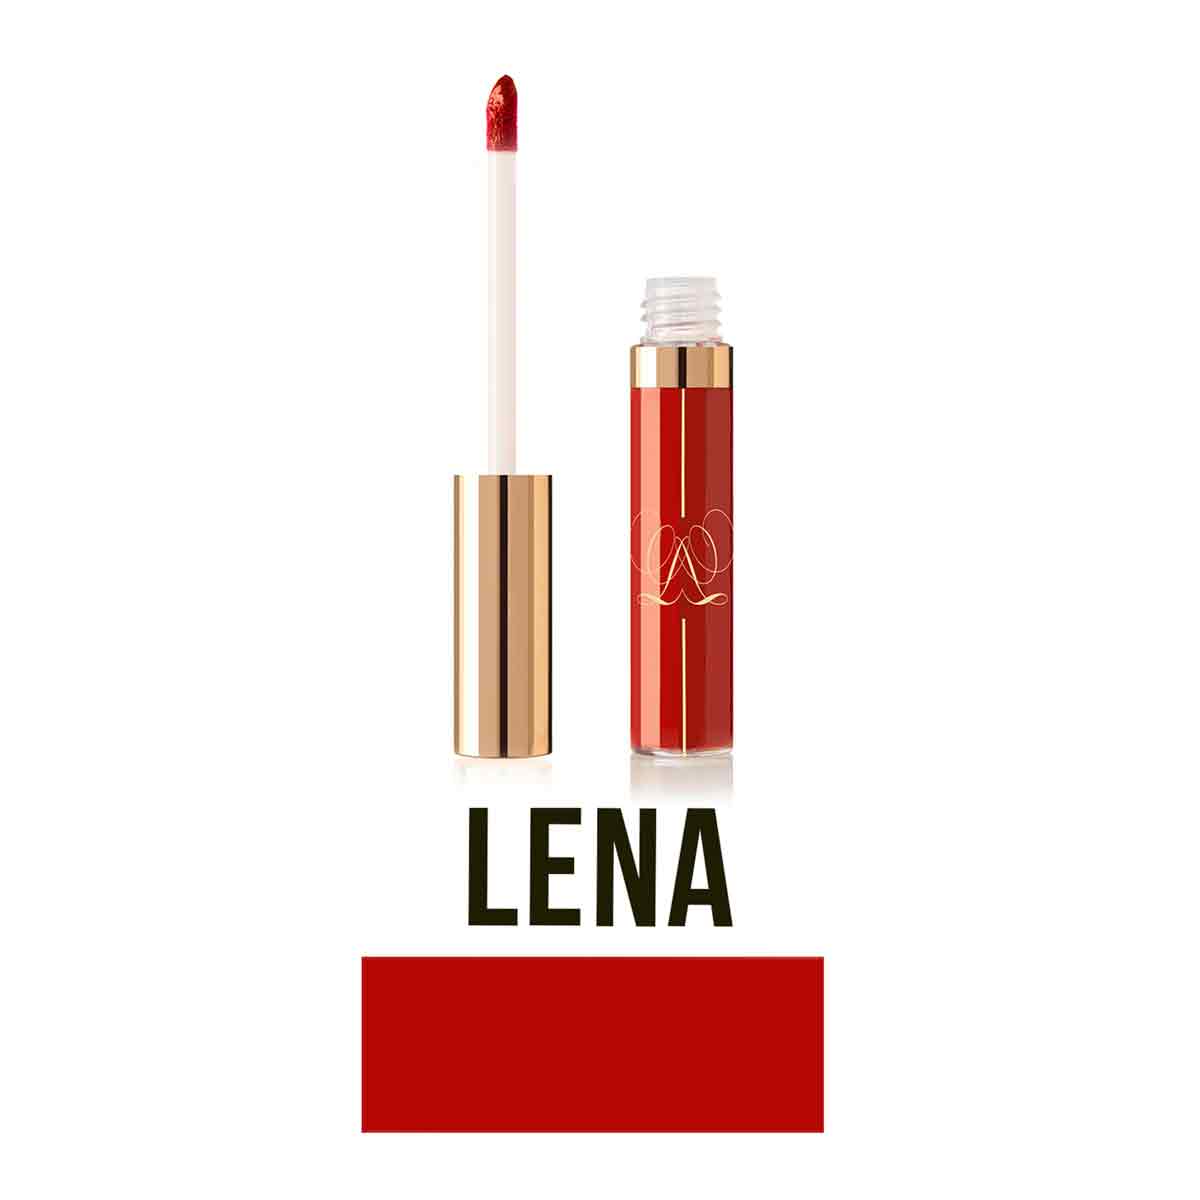 A high-shine, classic true red lip gloss with an unforgettable luminous finish that lasts for 6 hours without transferring. 